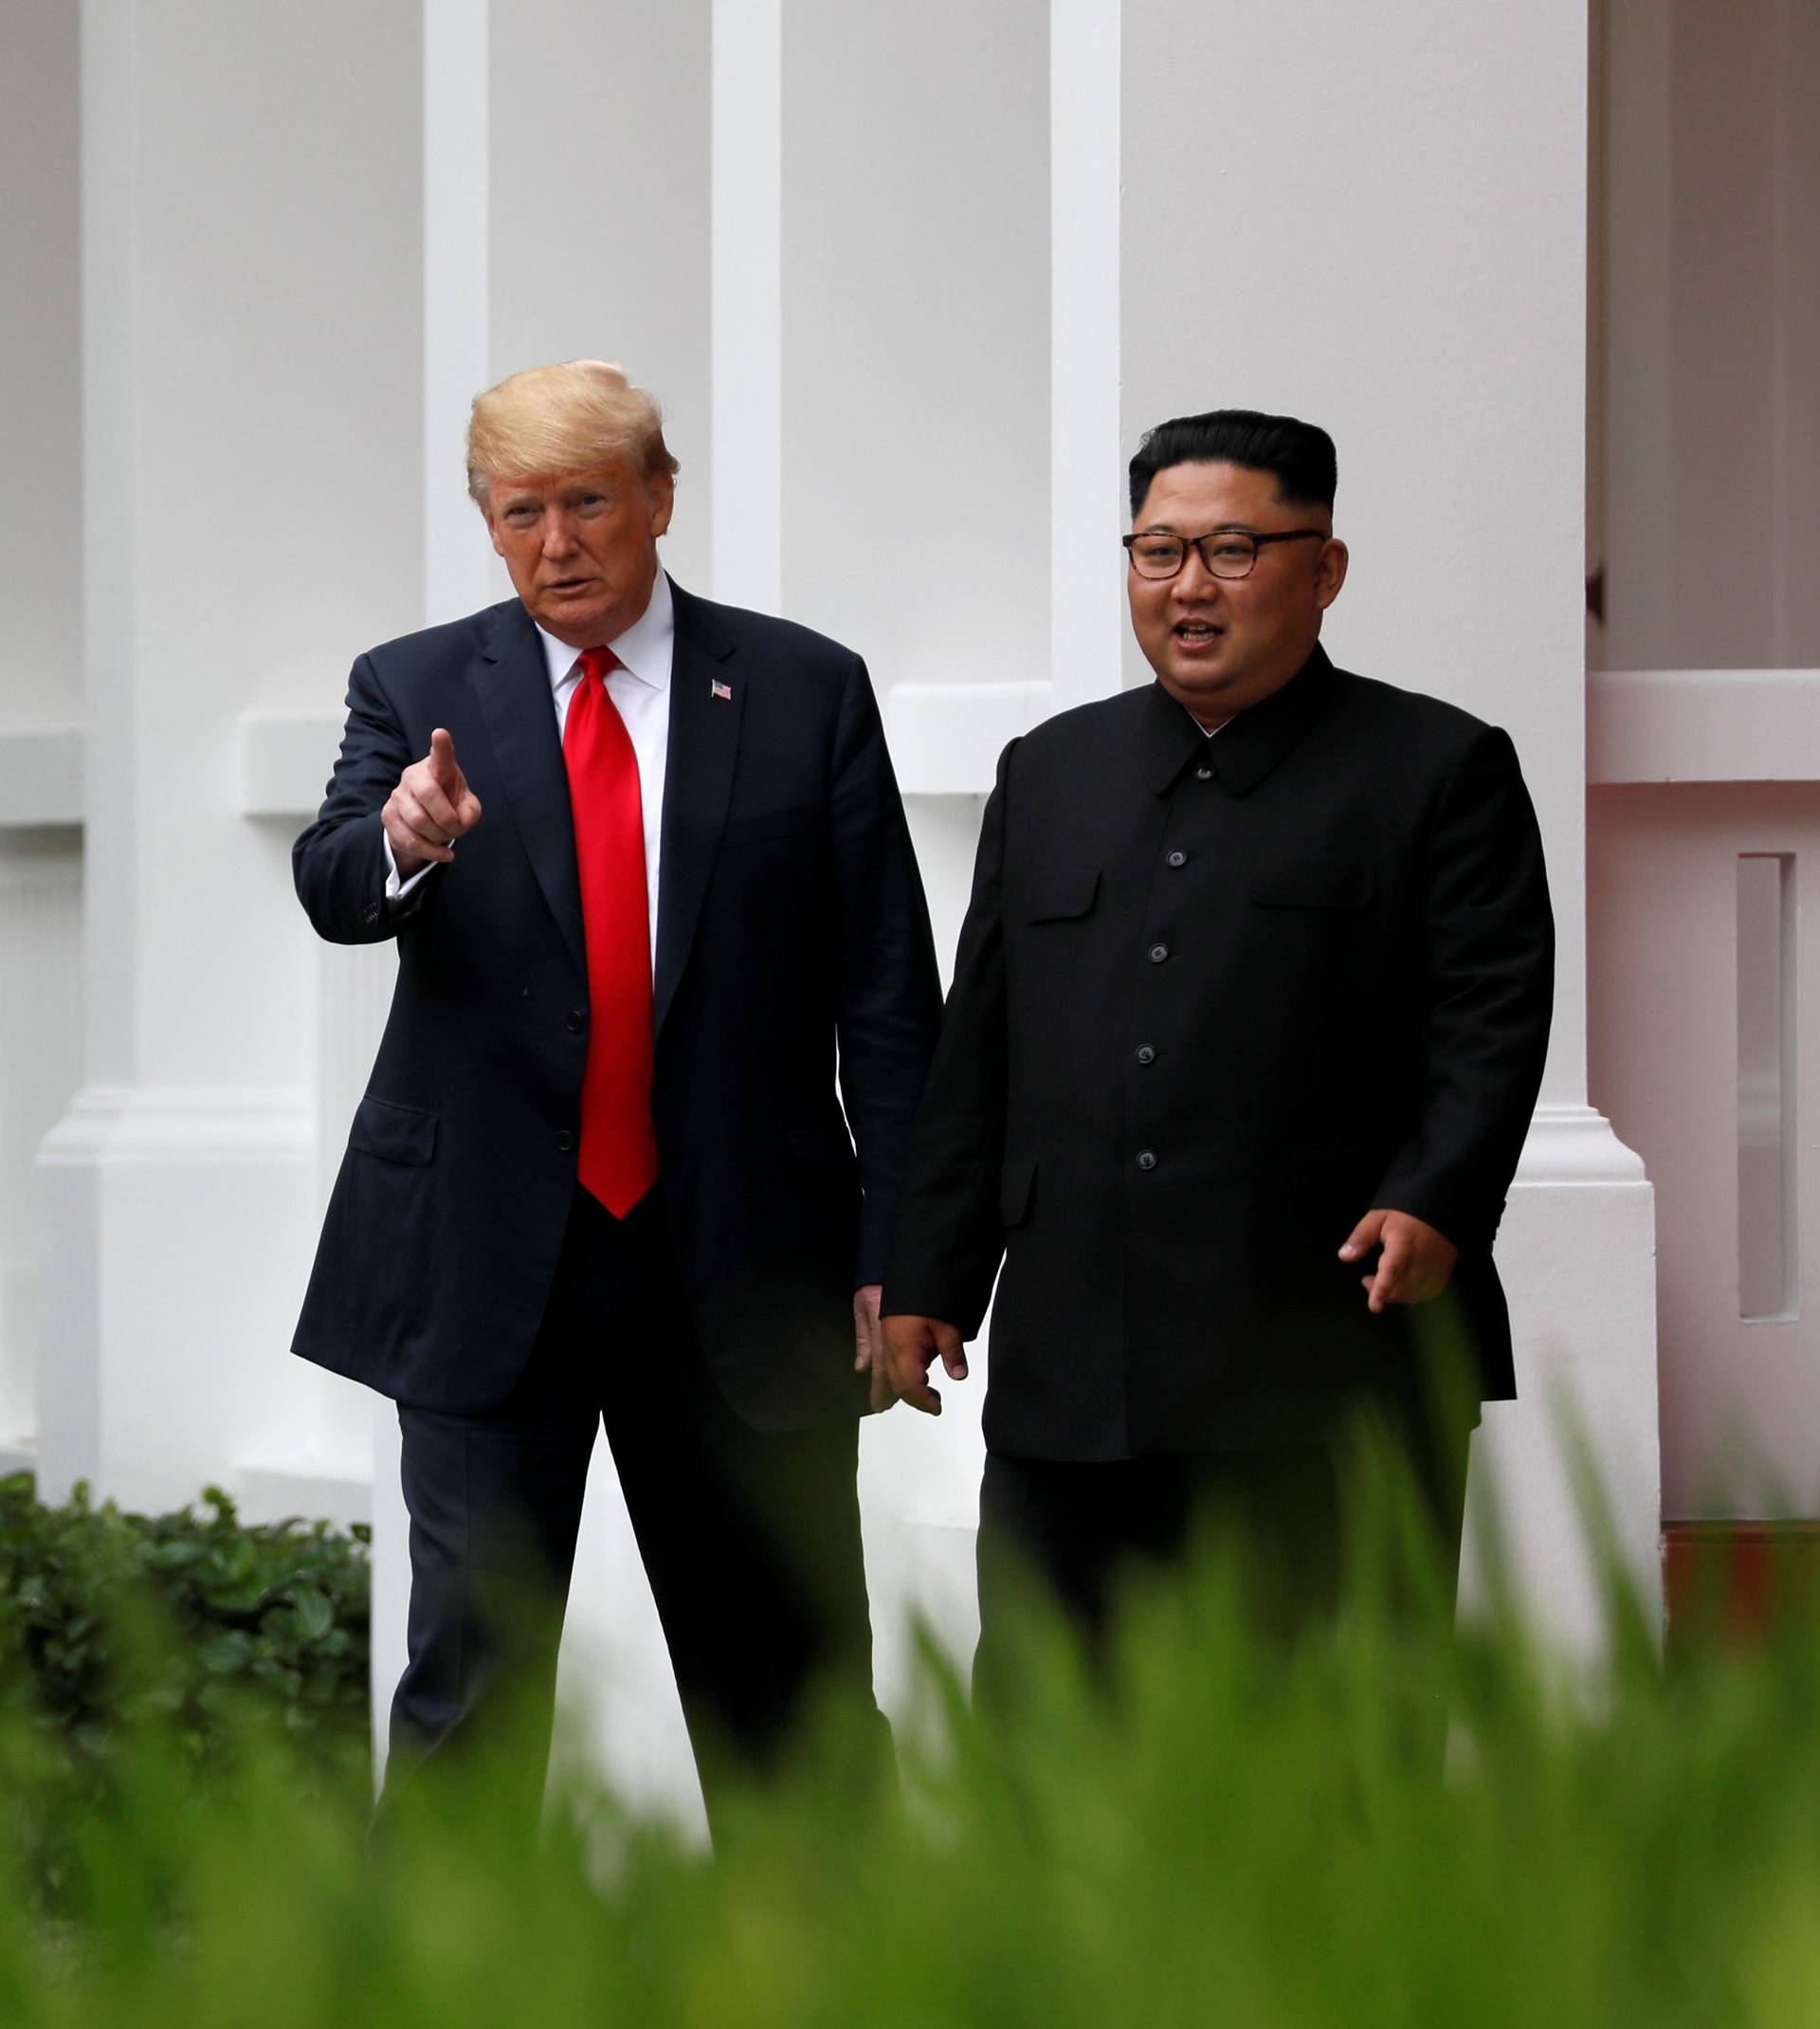 U.S. President Donald Trump and North Korean leader Kim Jong Un walk after lunch at the Capella Hotel on Sentosa island in Singapore